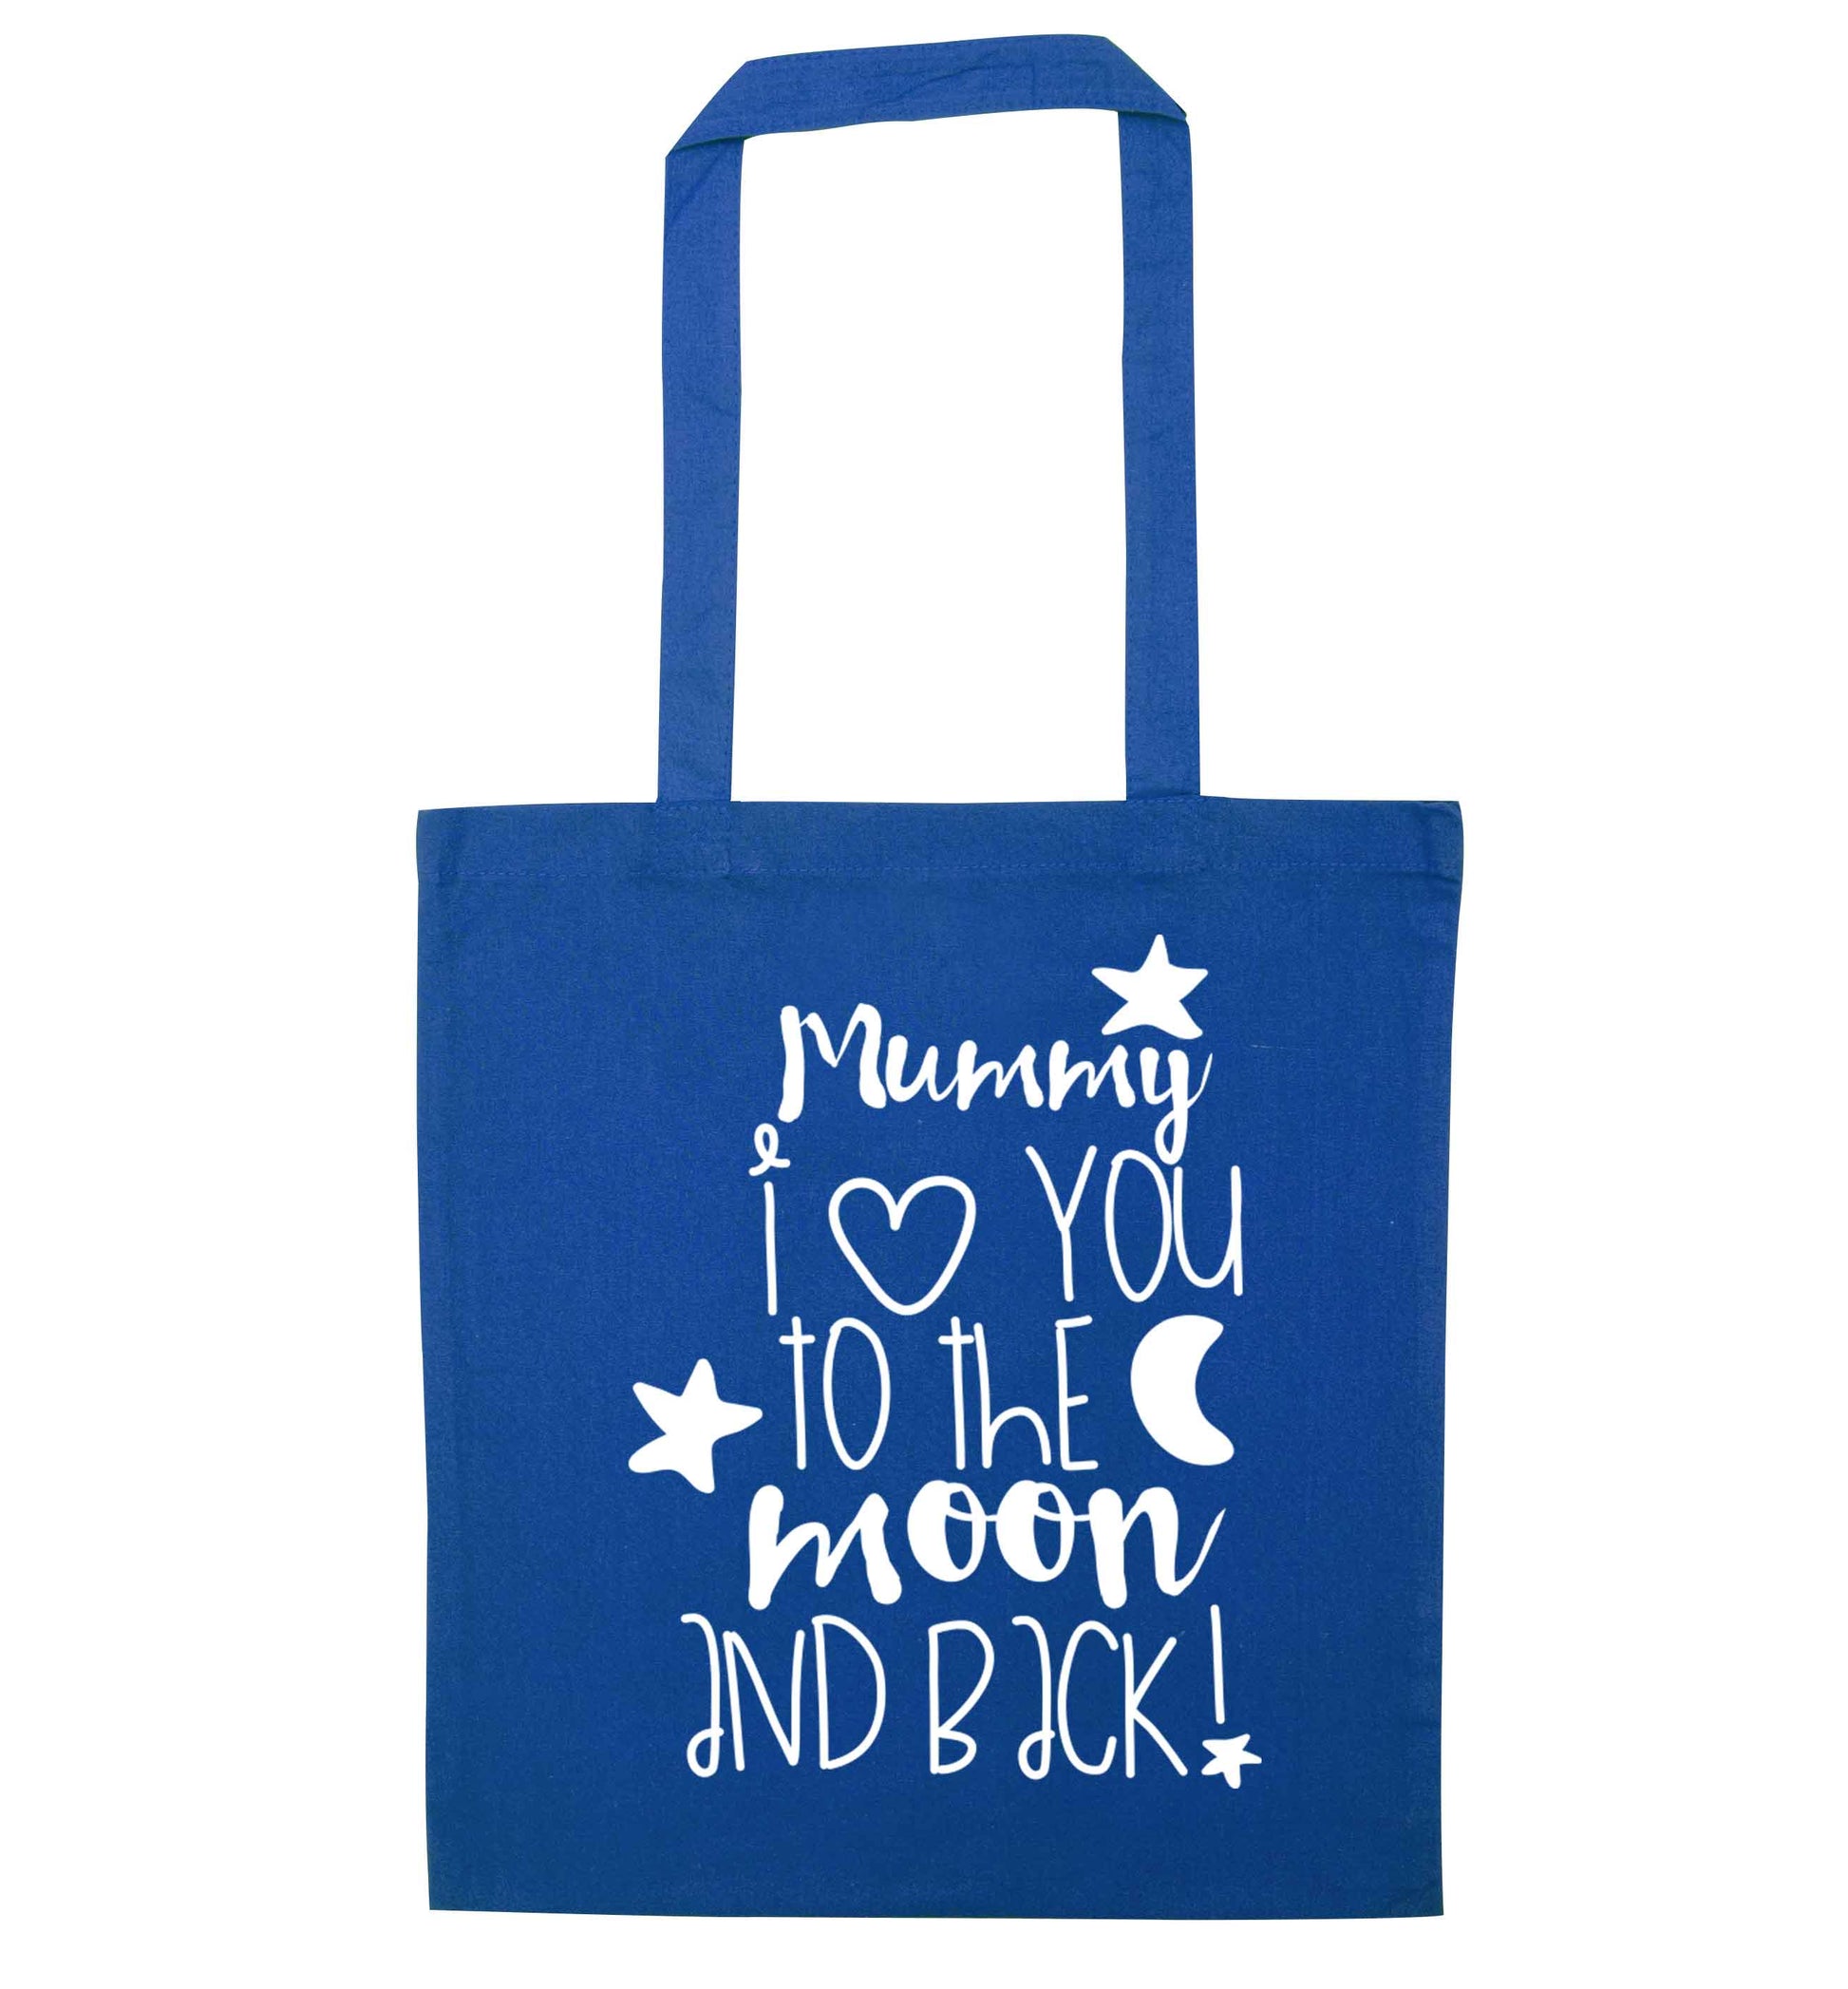 Mummy I love you to the moon and back blue tote bag